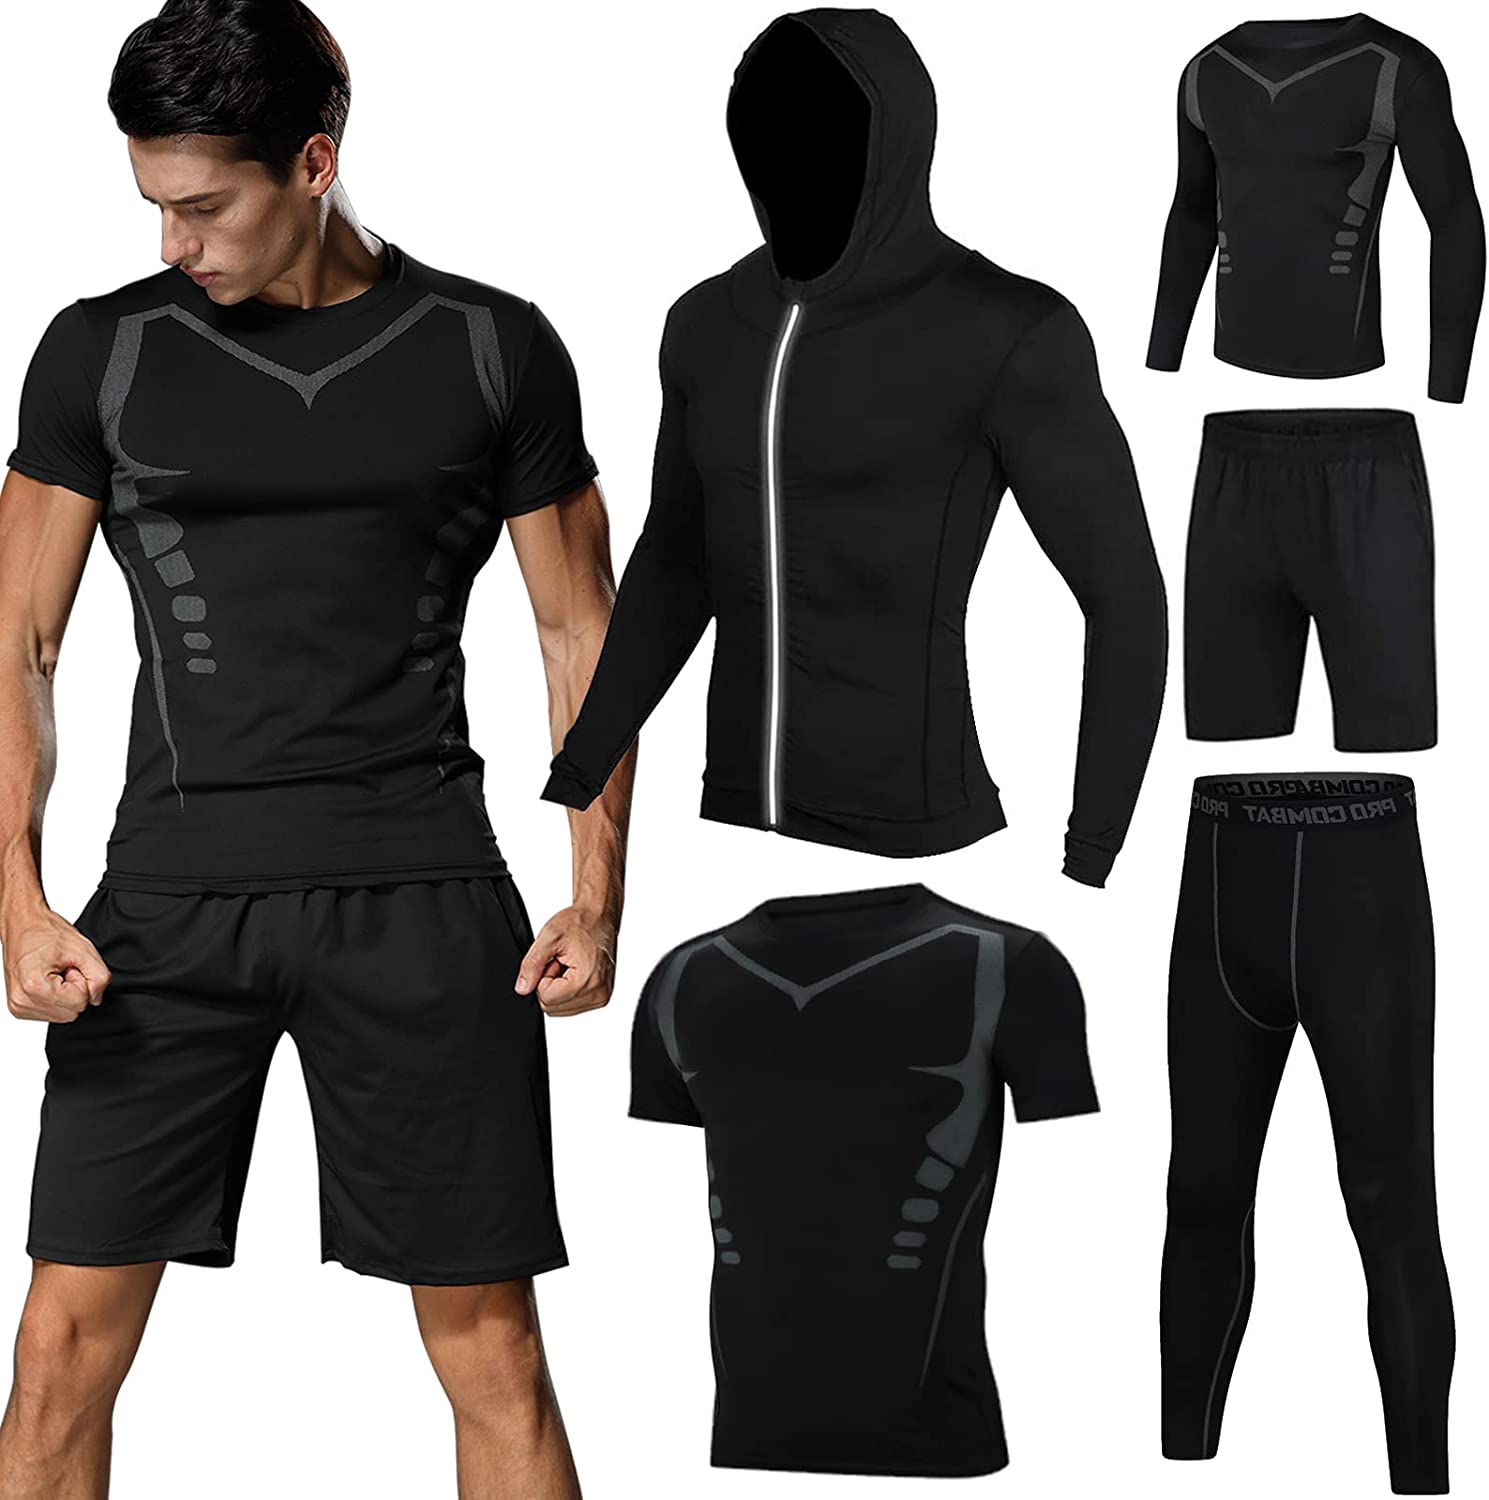 Athletic Apparel, Workout Clothes & College Apparel